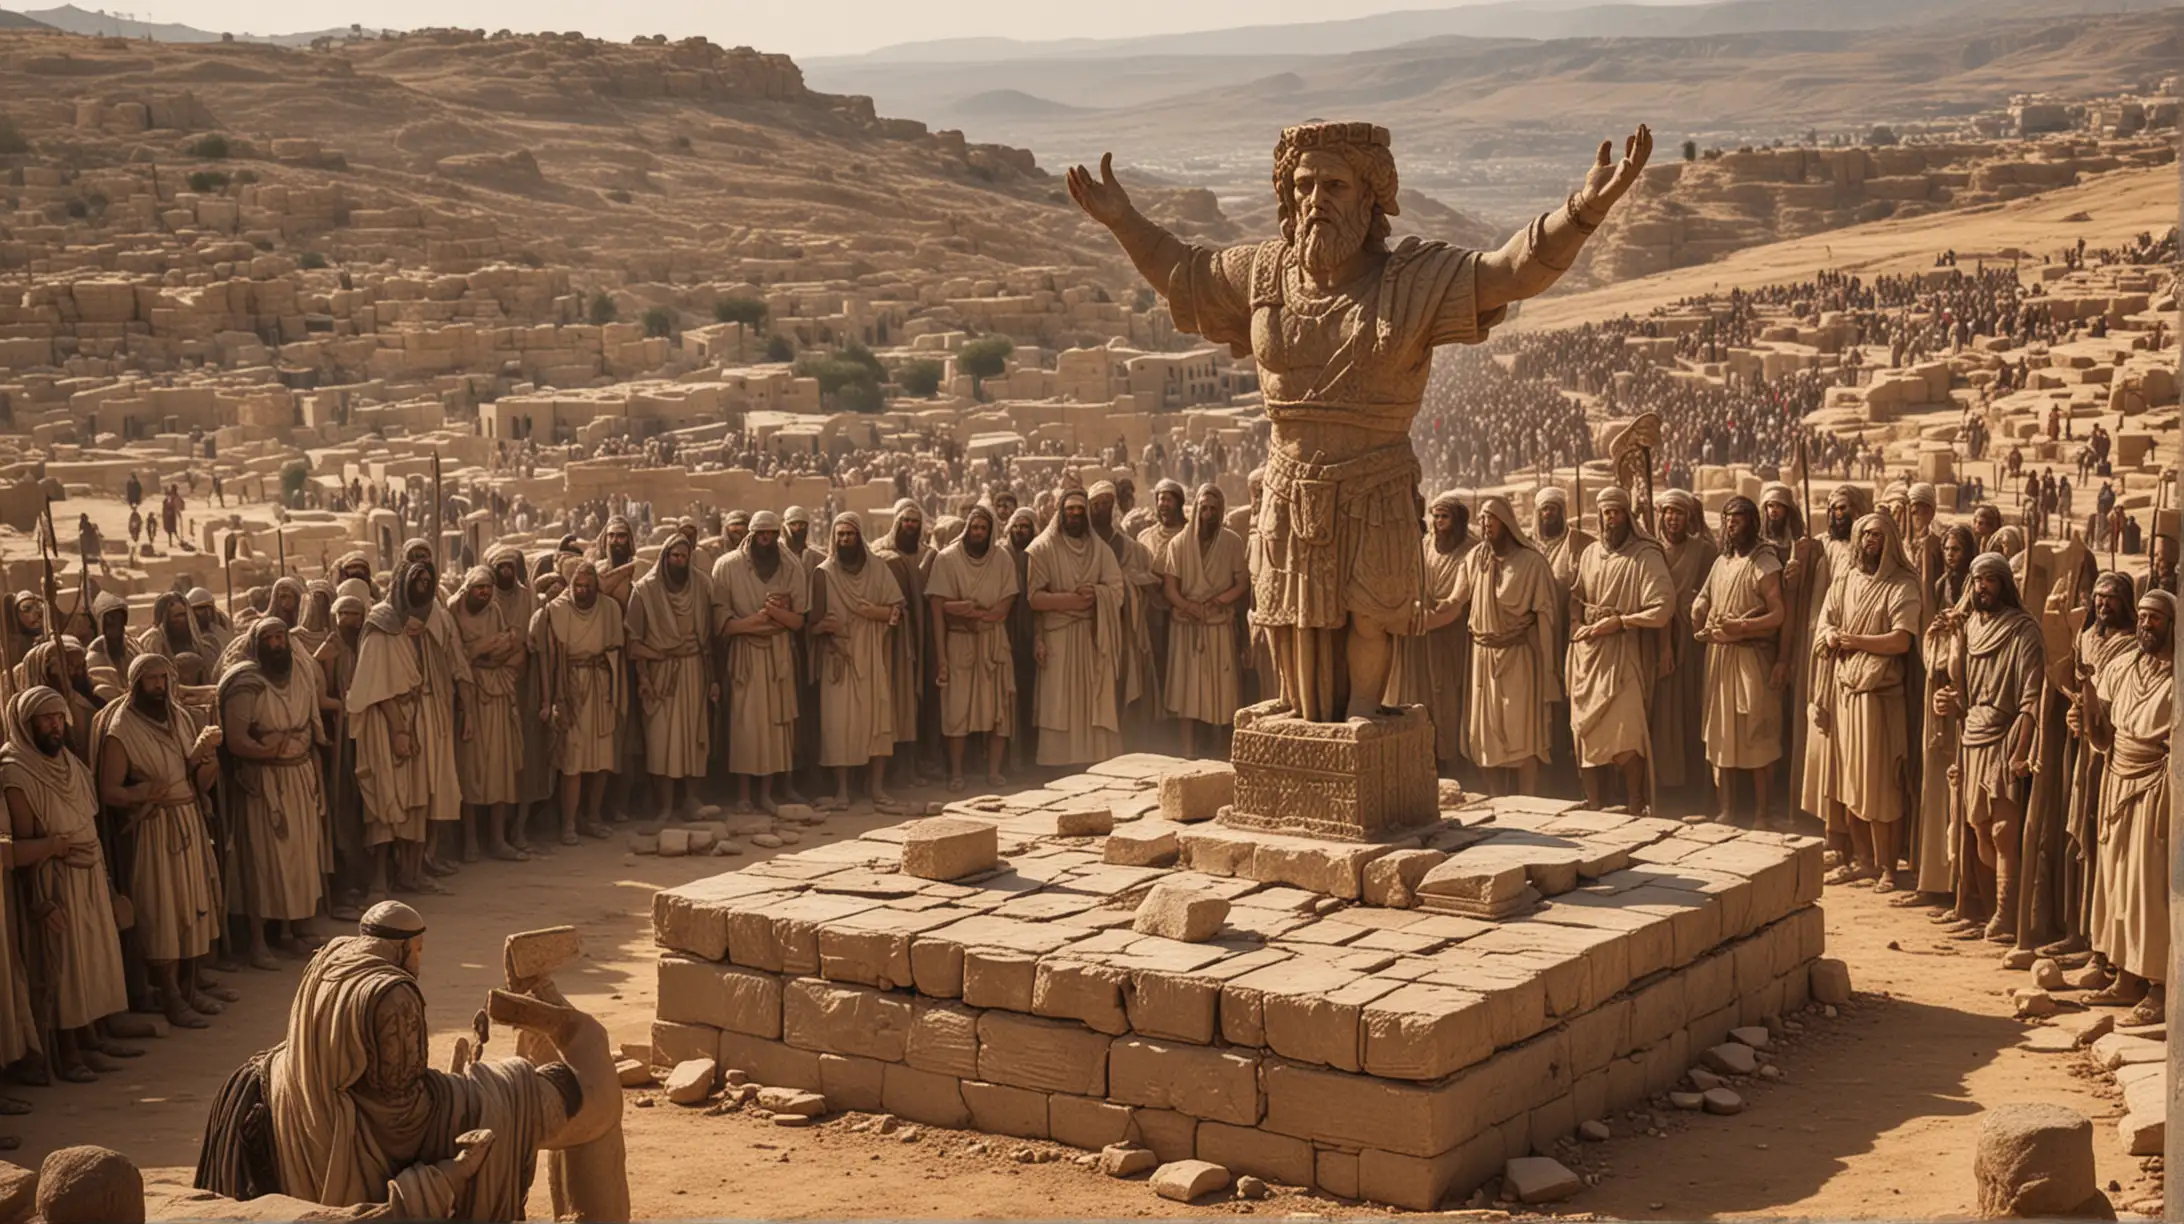 A statue of  Baal and a sacrificial altar from the Biblical Book of Judges , with a group of  people in the background during the Biblical era of Joshua.